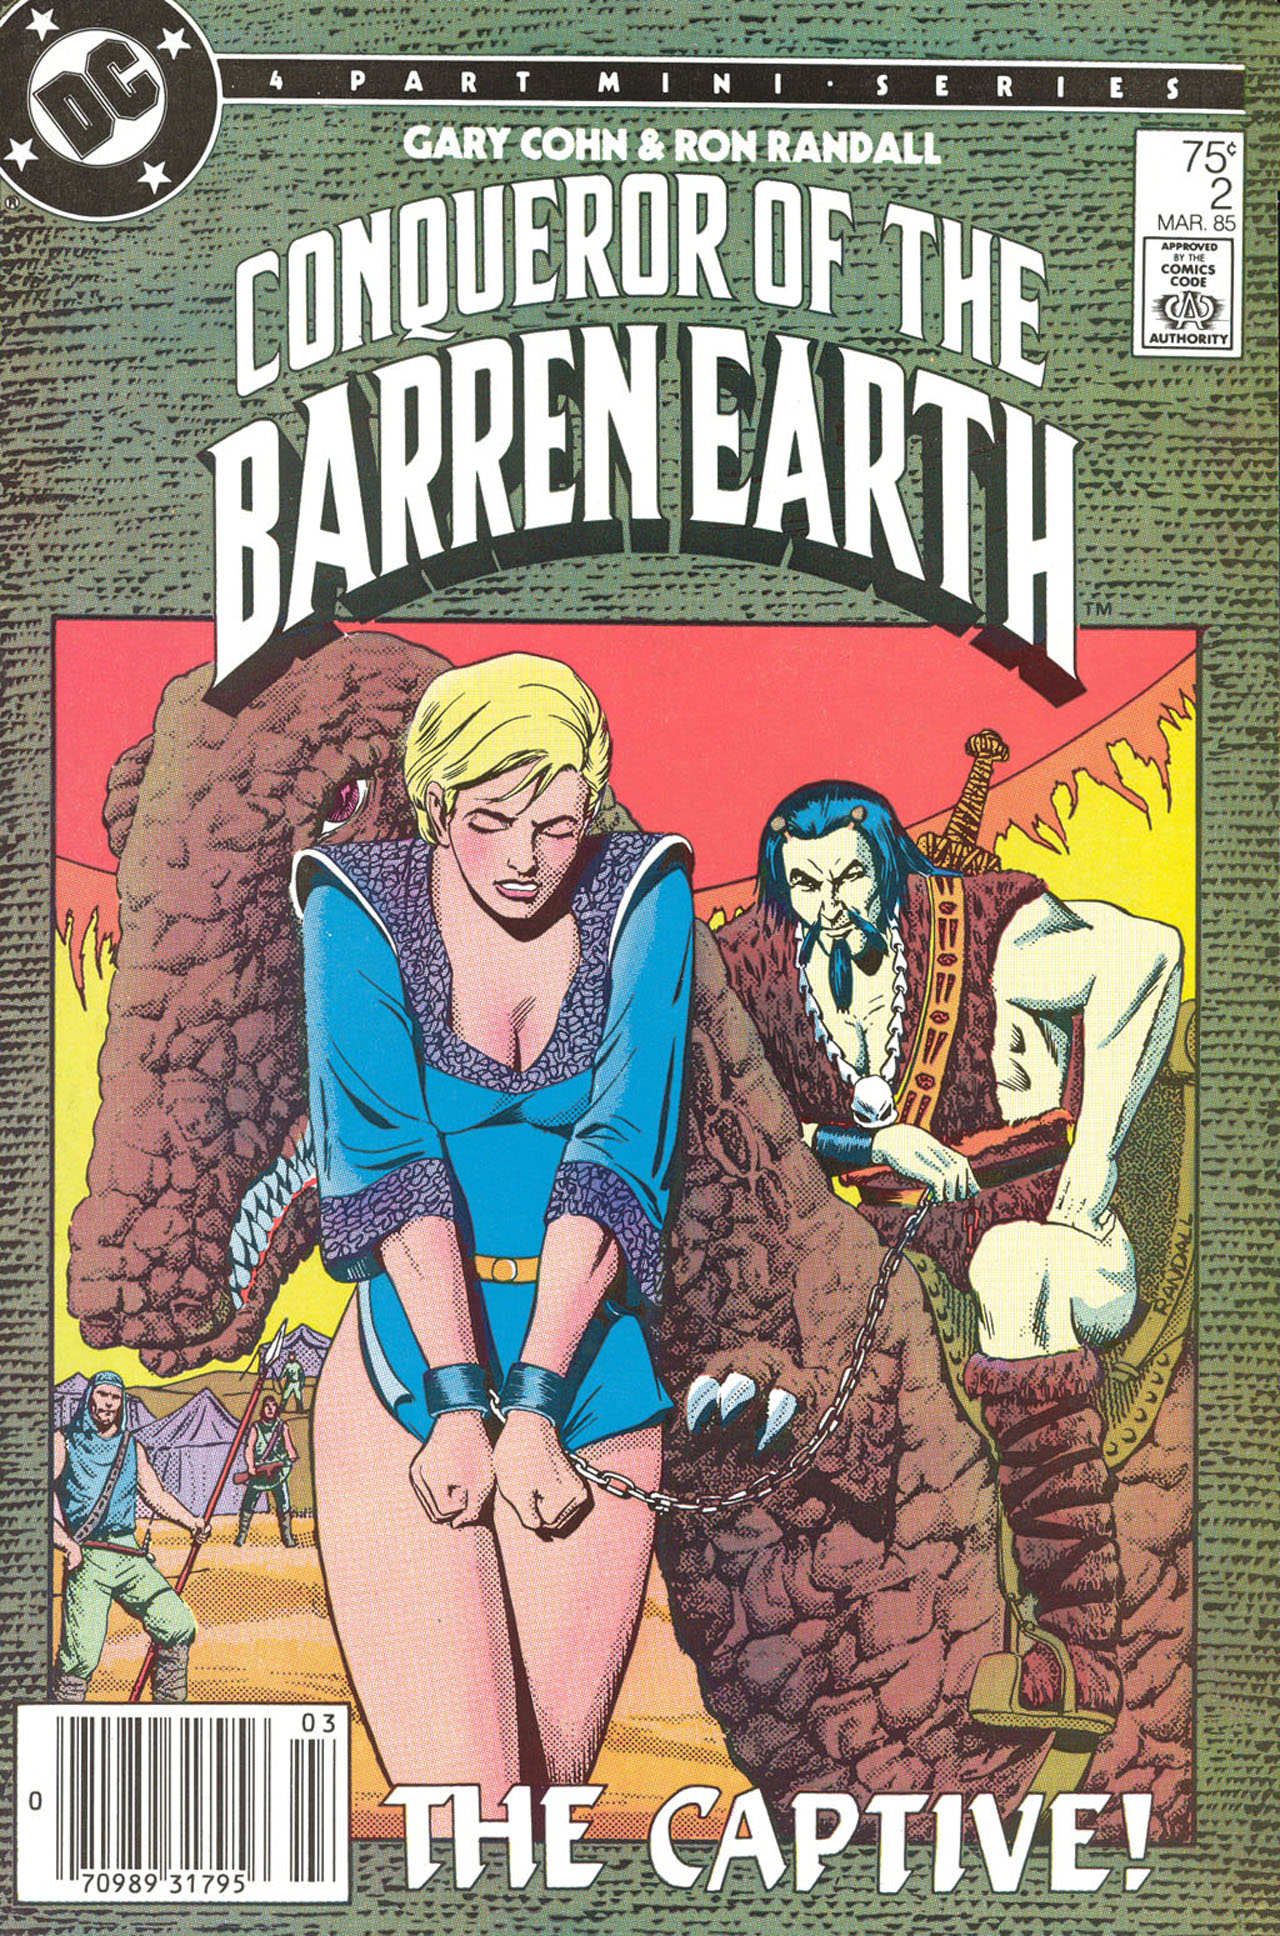 Read online Conqueror of the Barren Earth comic -  Issue #2 - 1